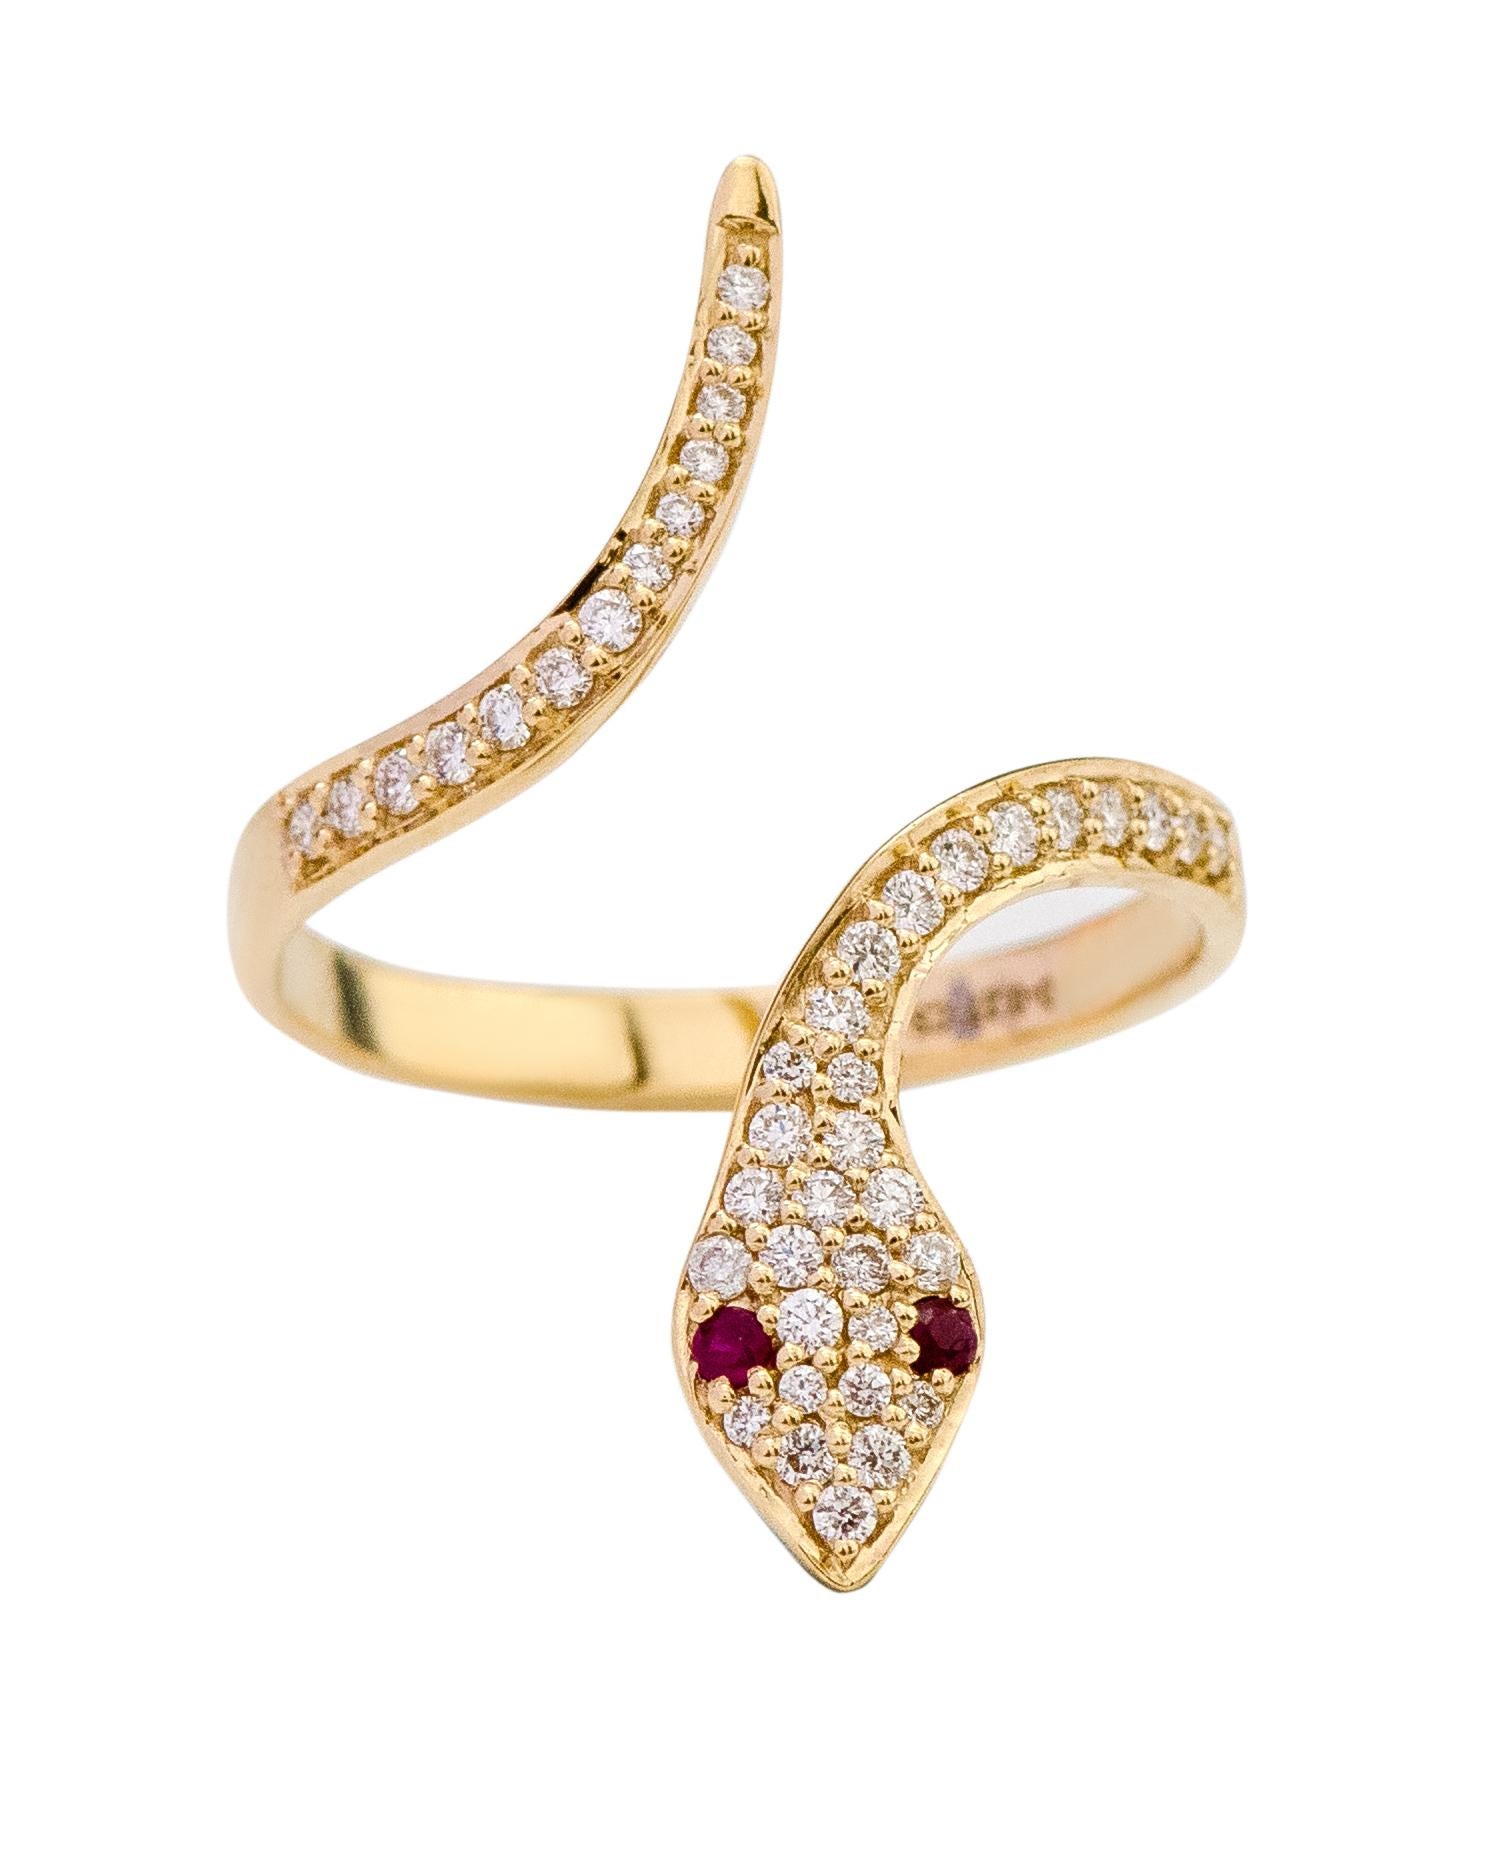 Women's 18 Karat Yellow Gold Snake Serpent Diamond and Ruby Ring For Sale